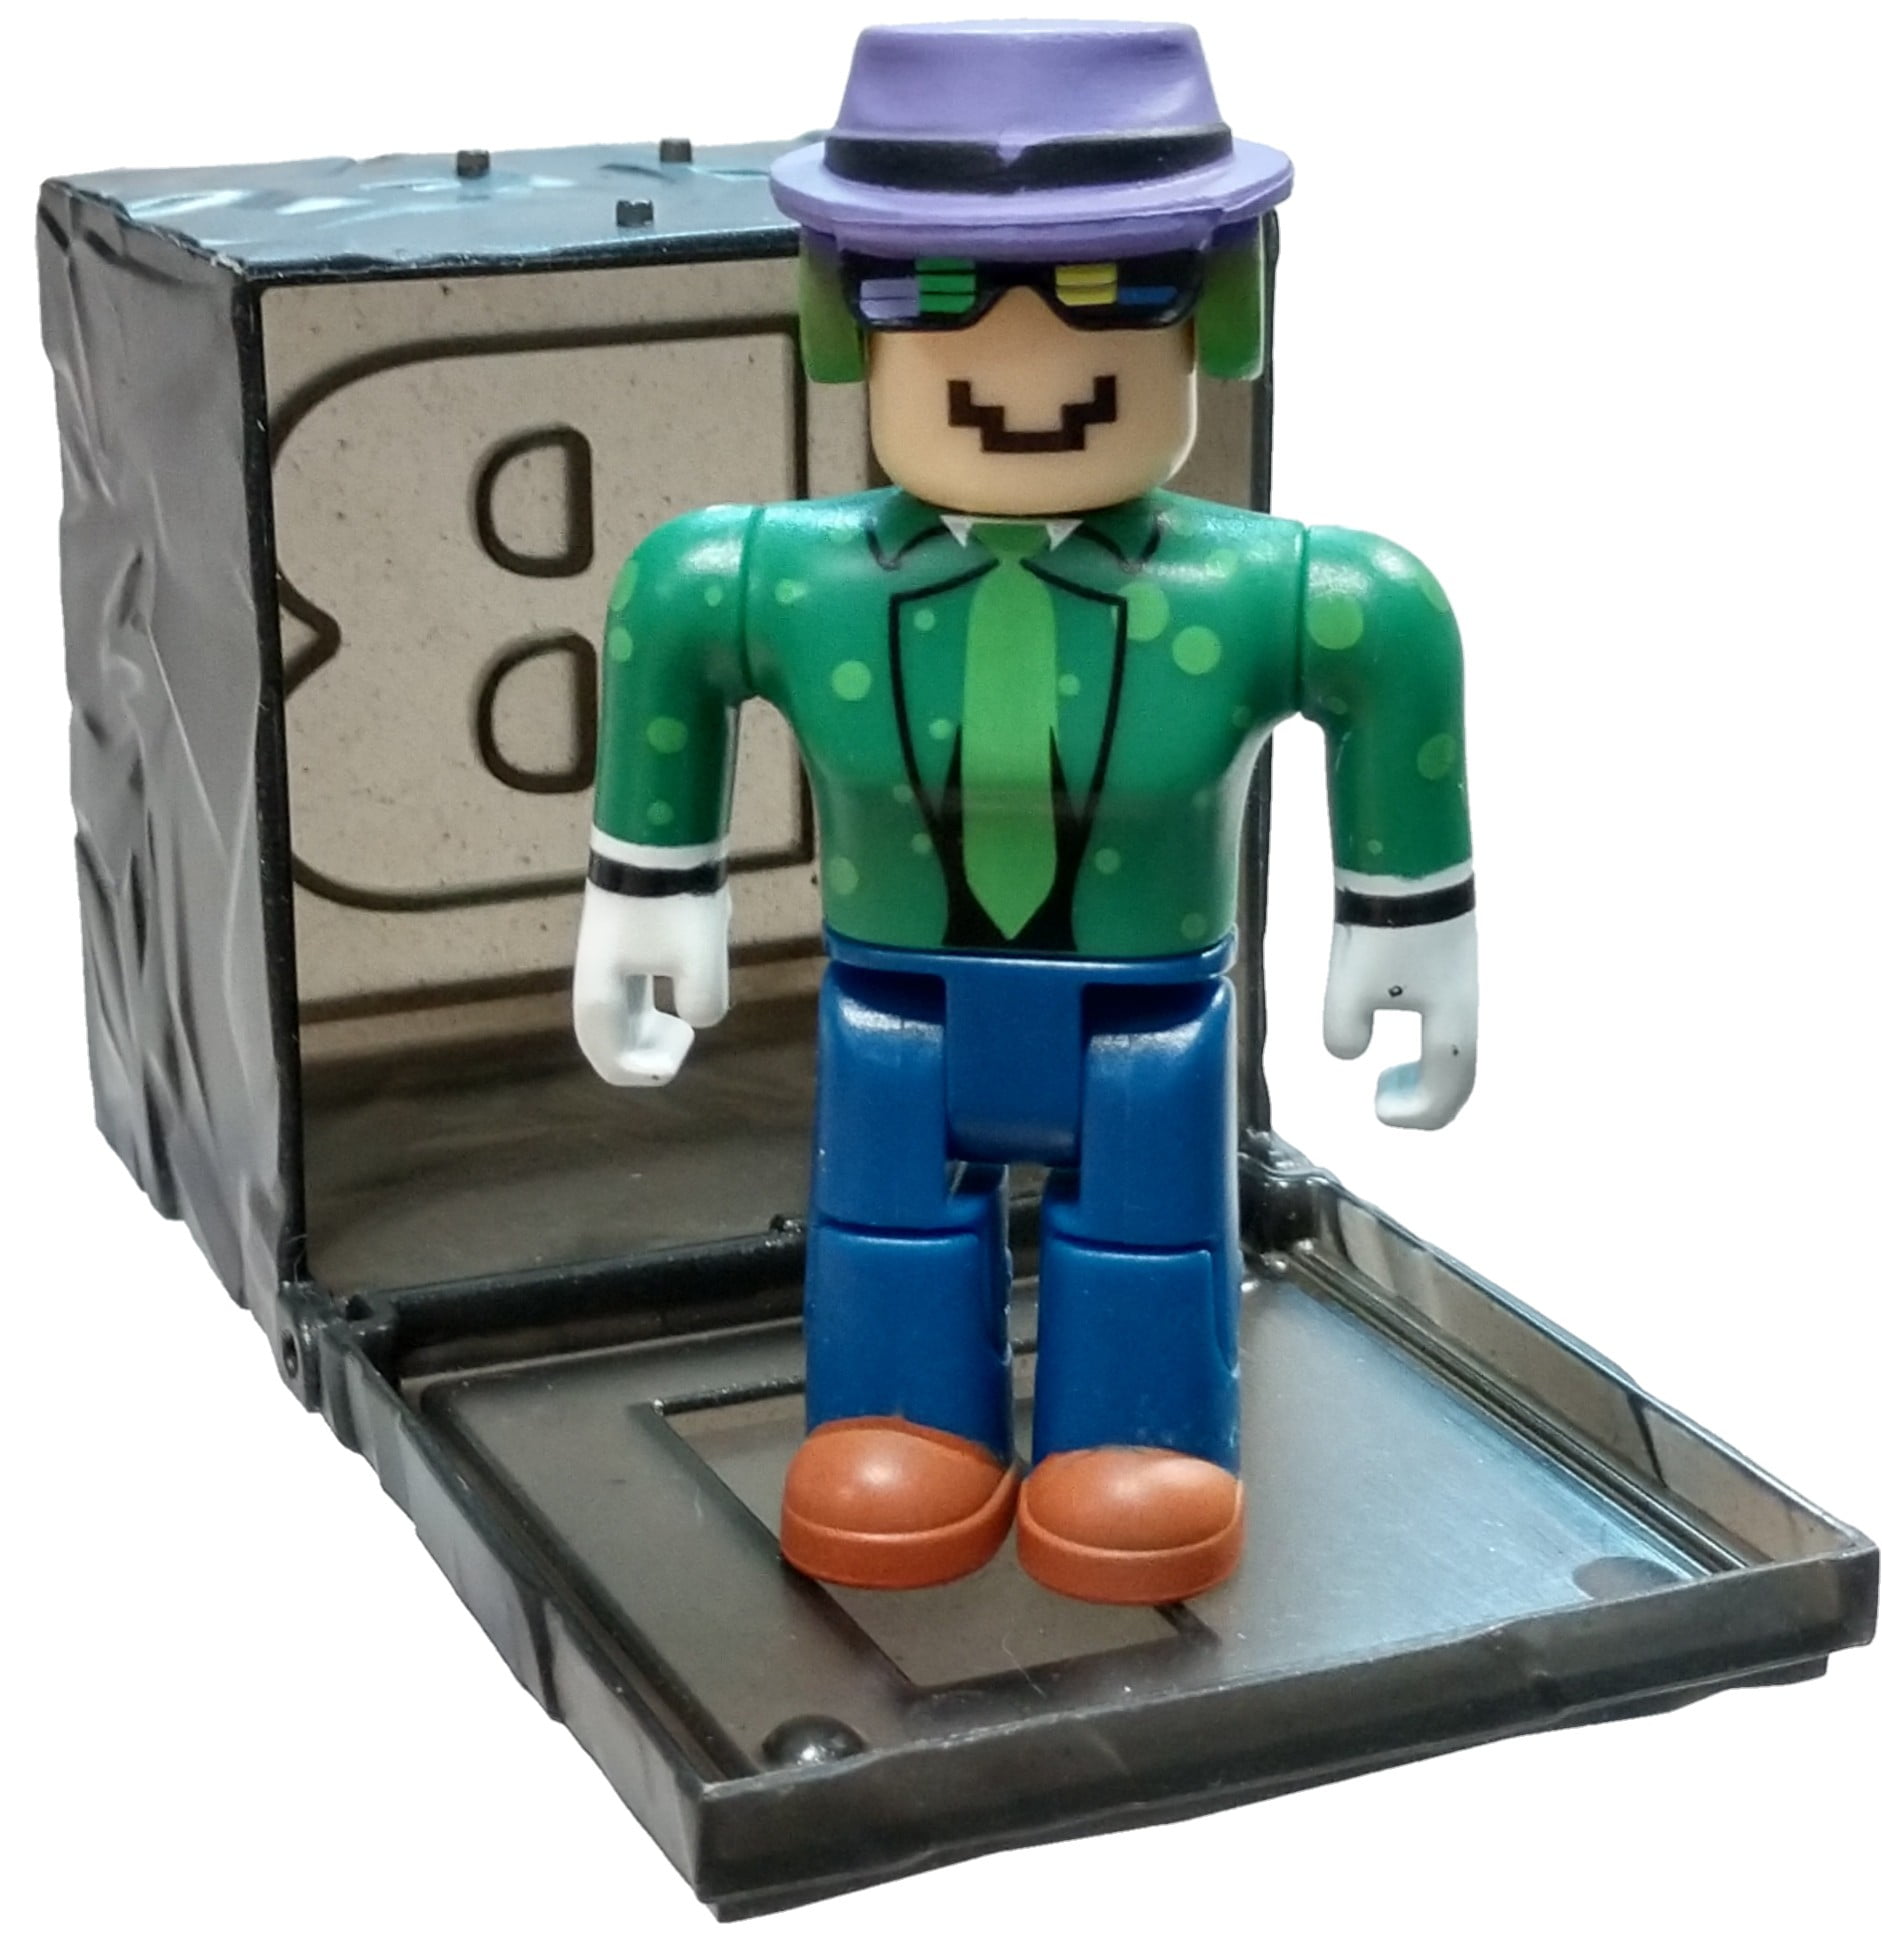 Roblox Series 7 Mrwindy Mini Figure With Black Cube And Online Code No Packaging Walmart Com Walmart Com - roblox series 1 mr robot mini figure without code no packaging walmart com walmart com